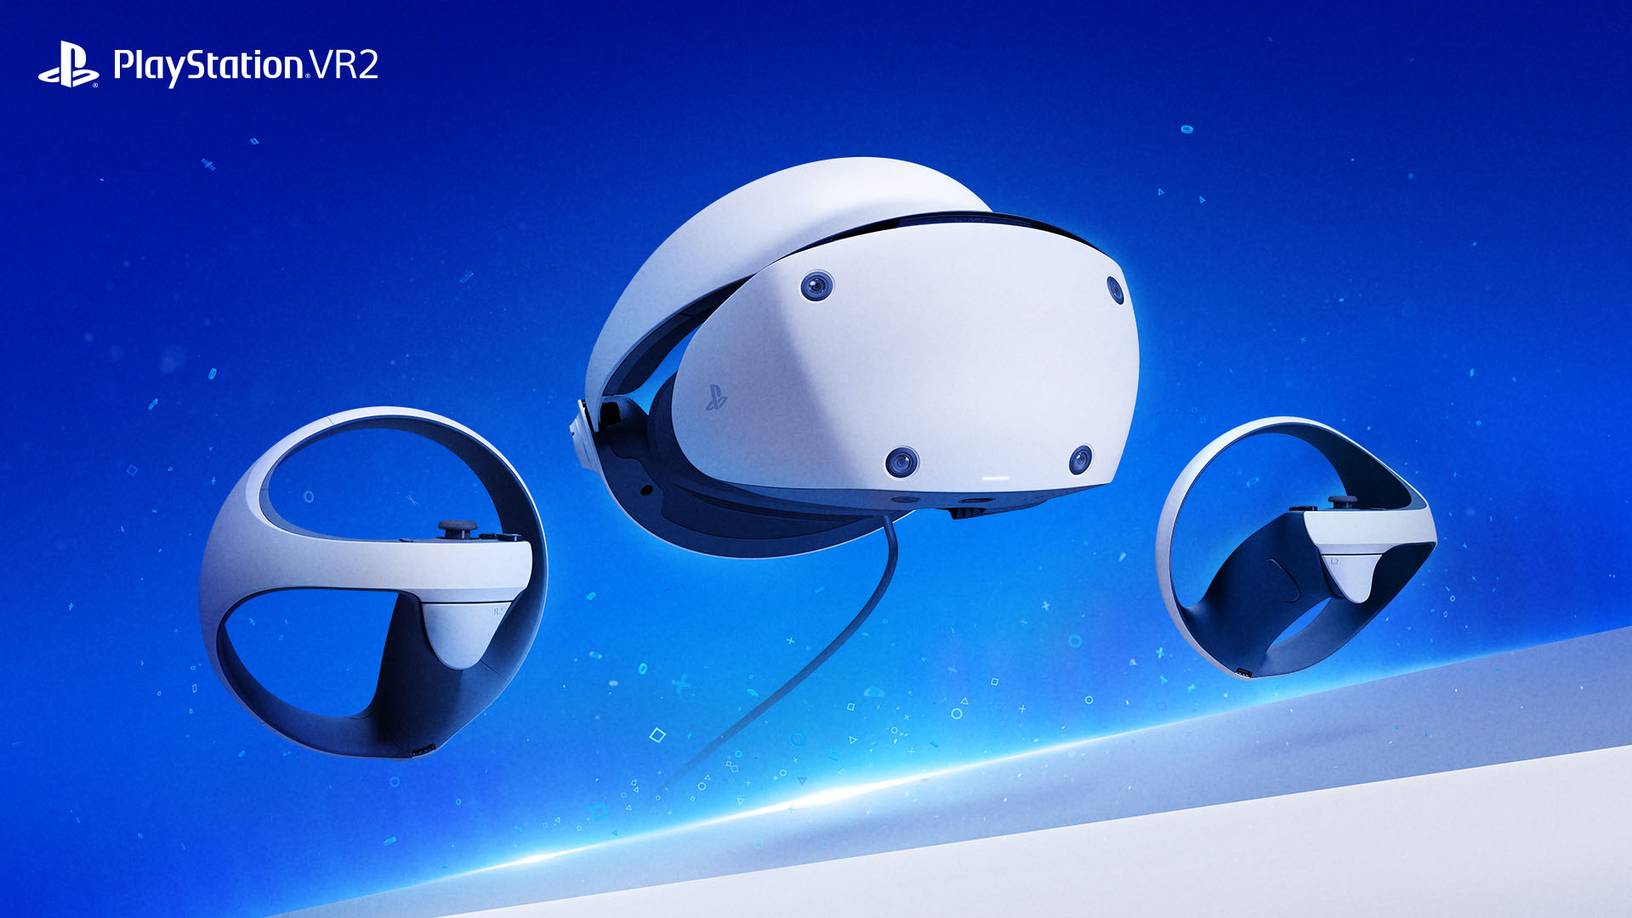 Playstation VR 2 Hands-on: 8 pros, 3 cons & a question